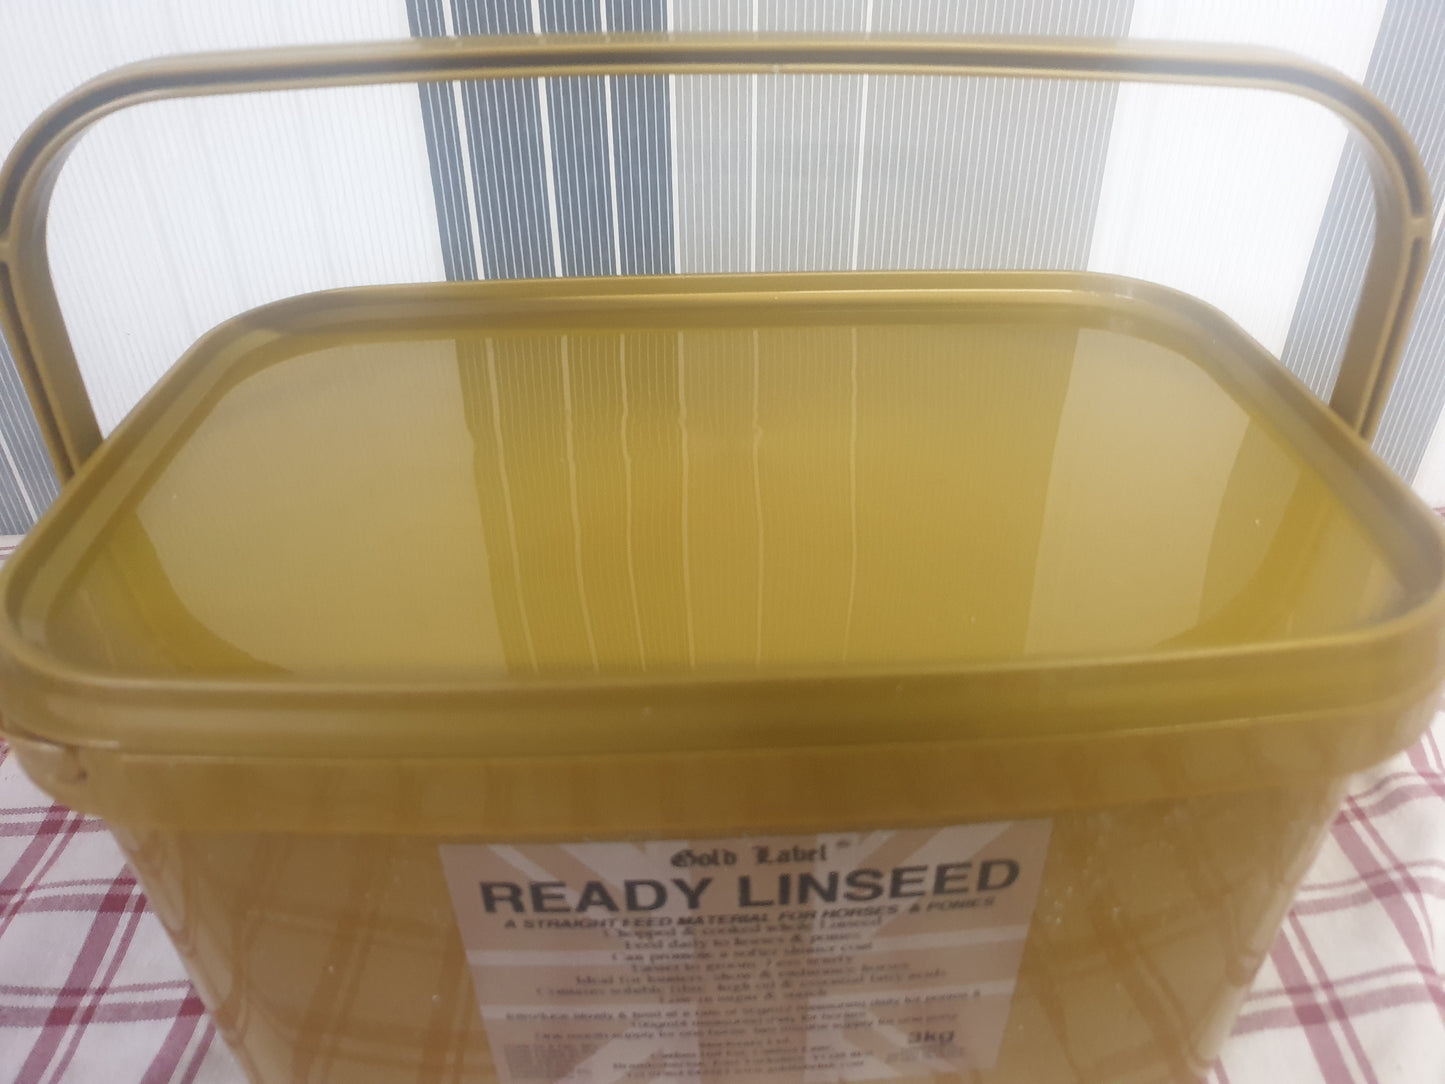 NEW Gold Label Ready Linseed 3Kg FREE POSTAGE 🟢